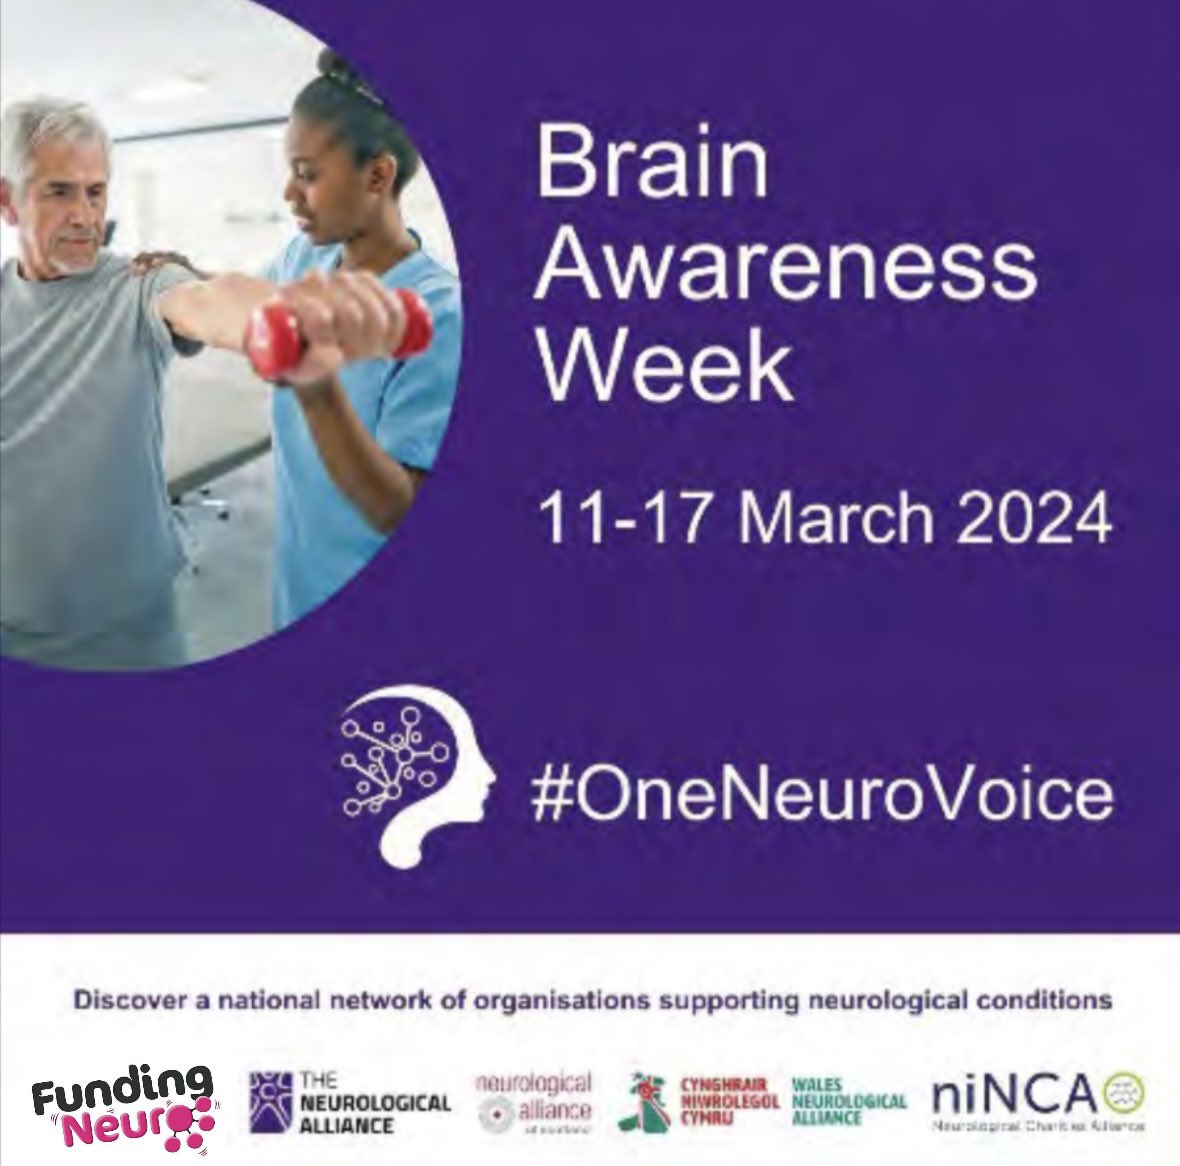 It’s Brain Awareness Week. Please help spread awareness of all neurological conditions and help talk about it 🧠 ❤️ #OneNeuroVoice #BrainAwarenessWeek #FundingNeuro